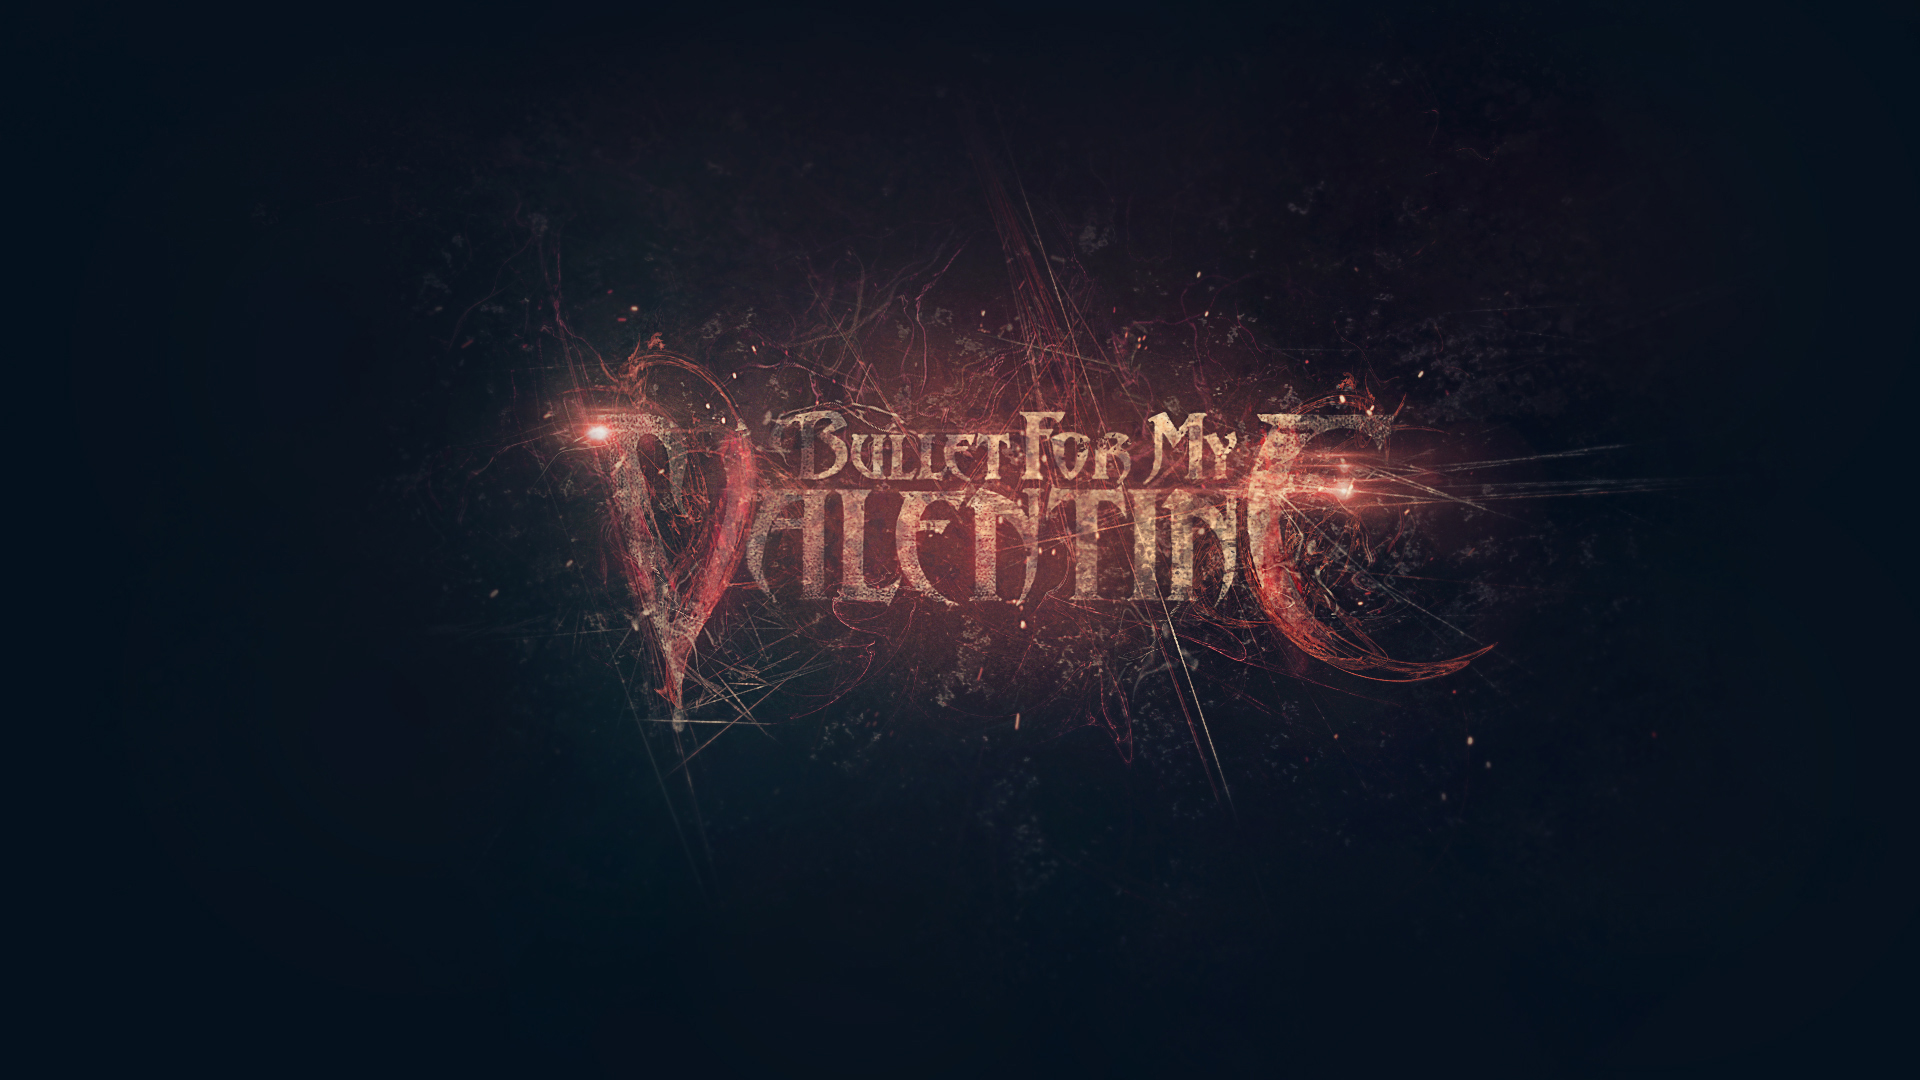 bullet for my valentine, music